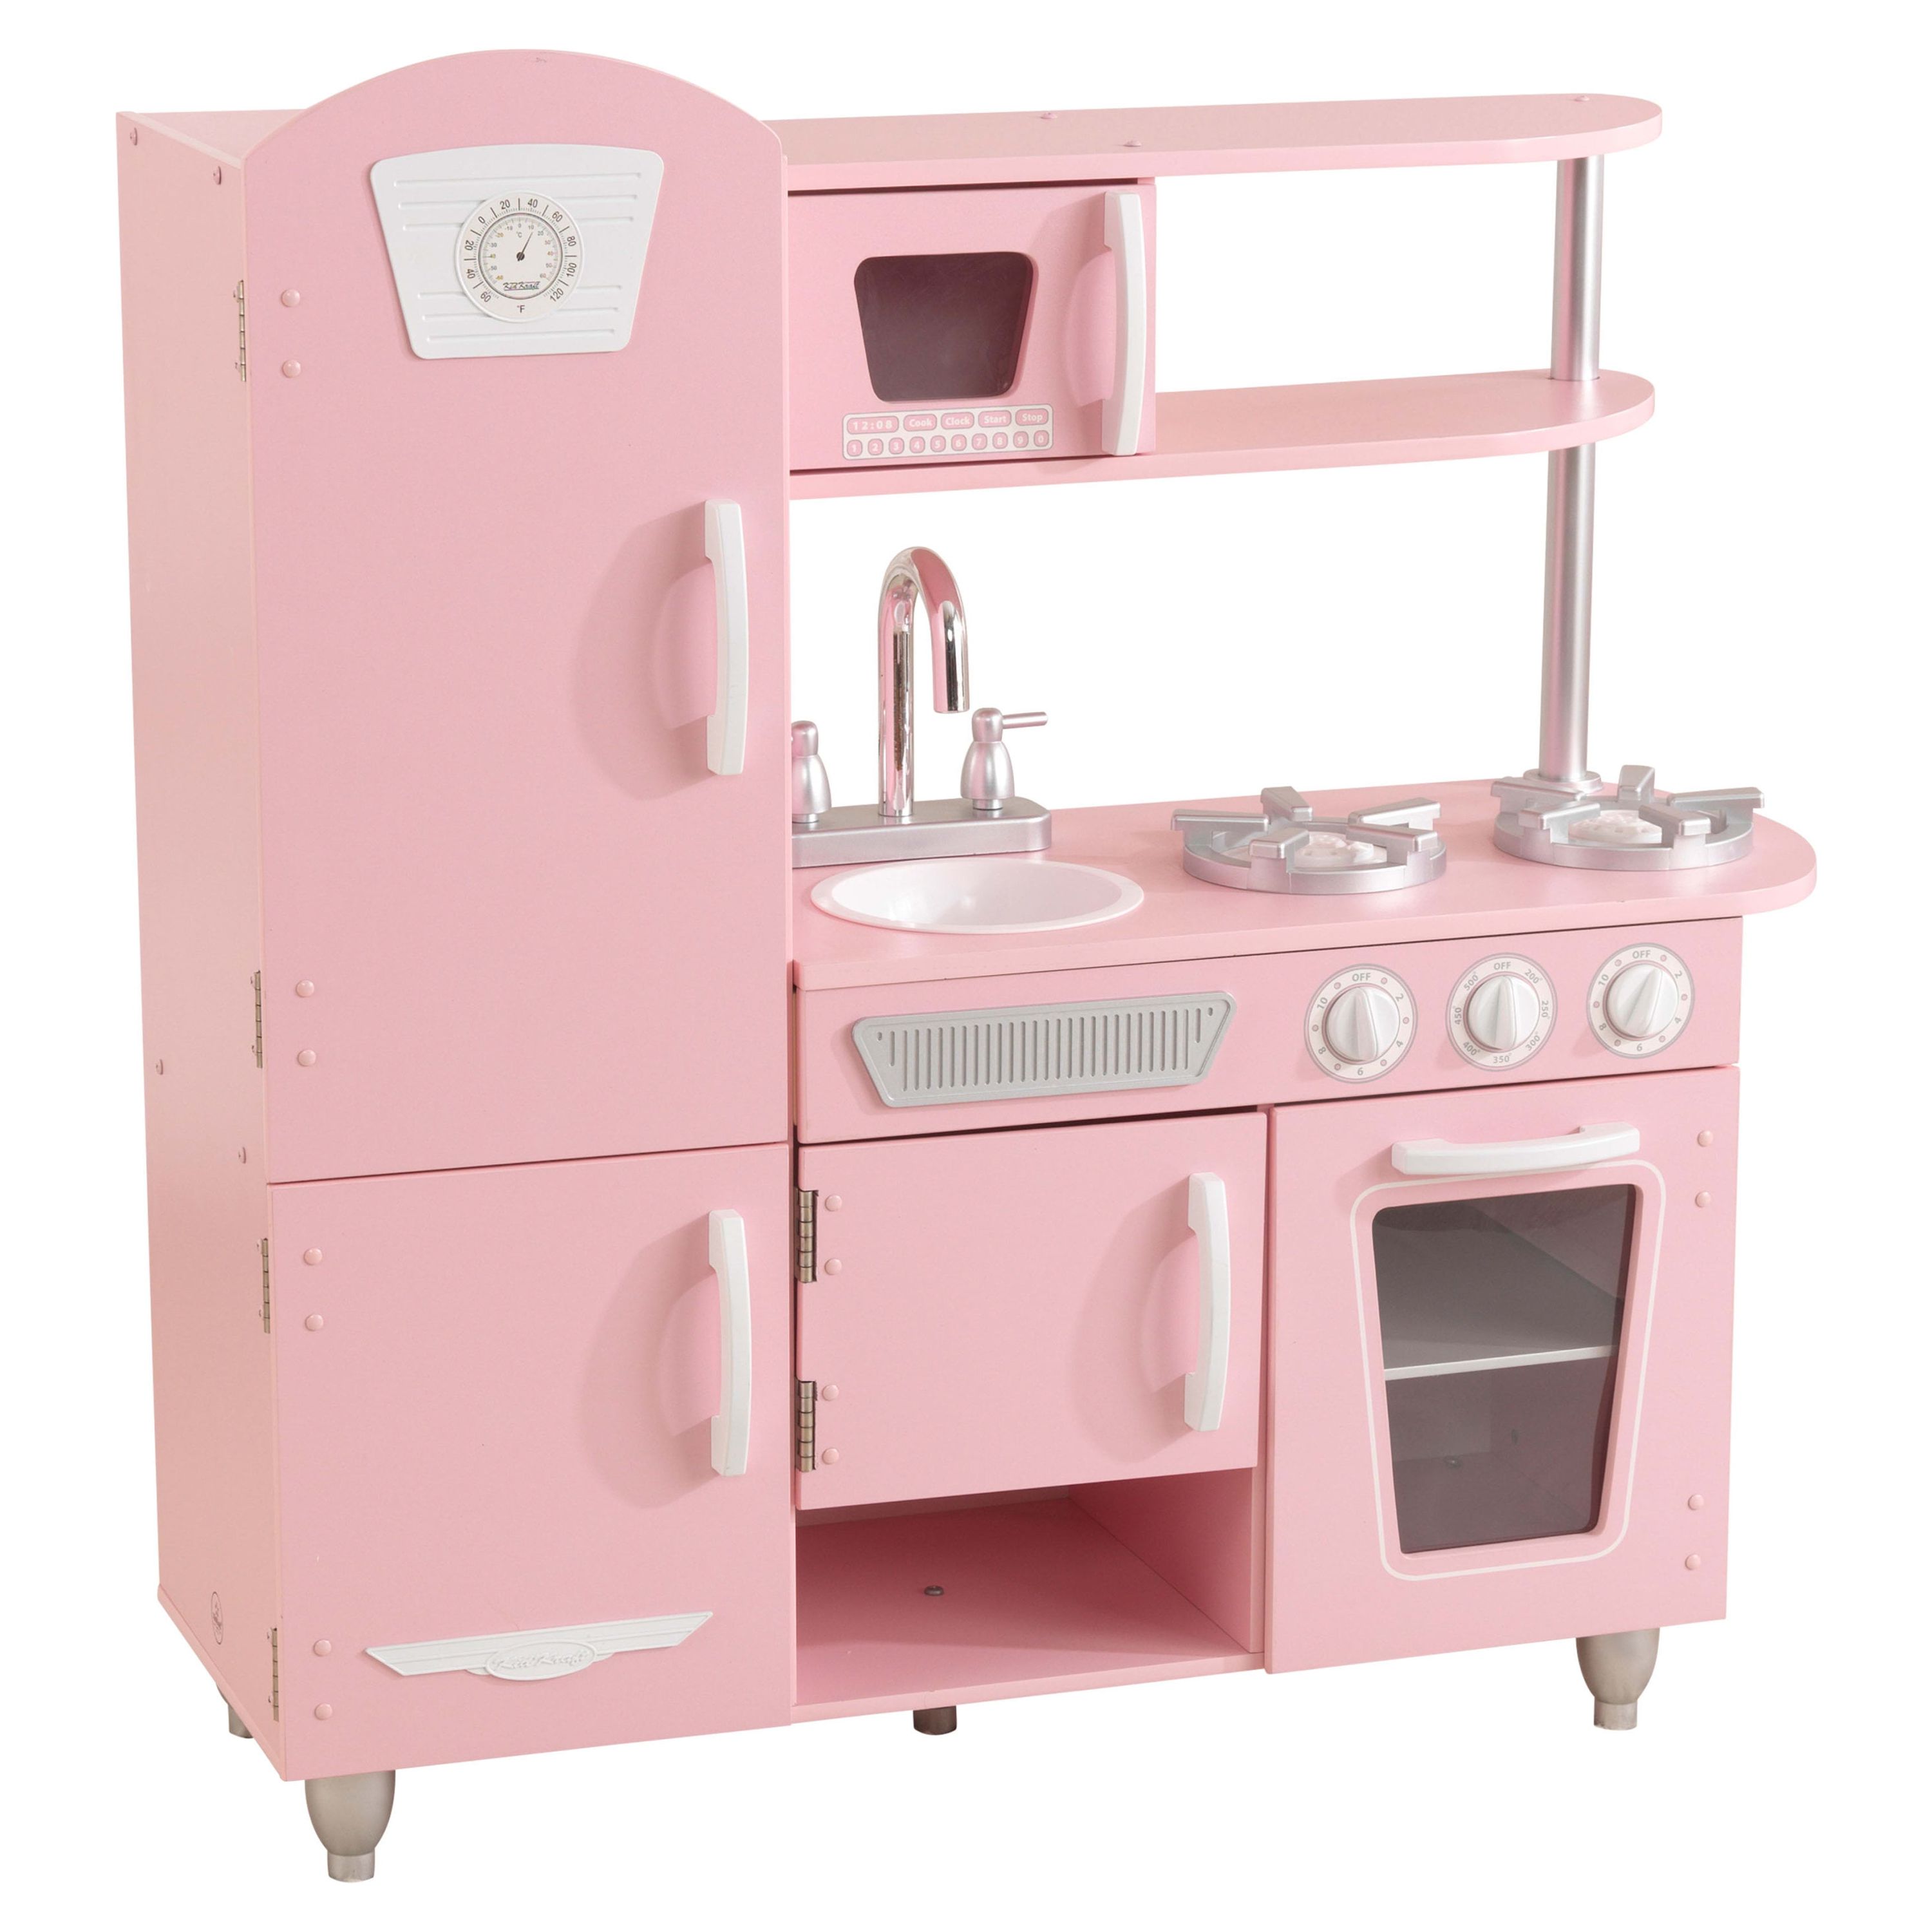 KidKraft Vintage Wooden Play Kitchen with Working Knobs, Pink - image 1 of 7